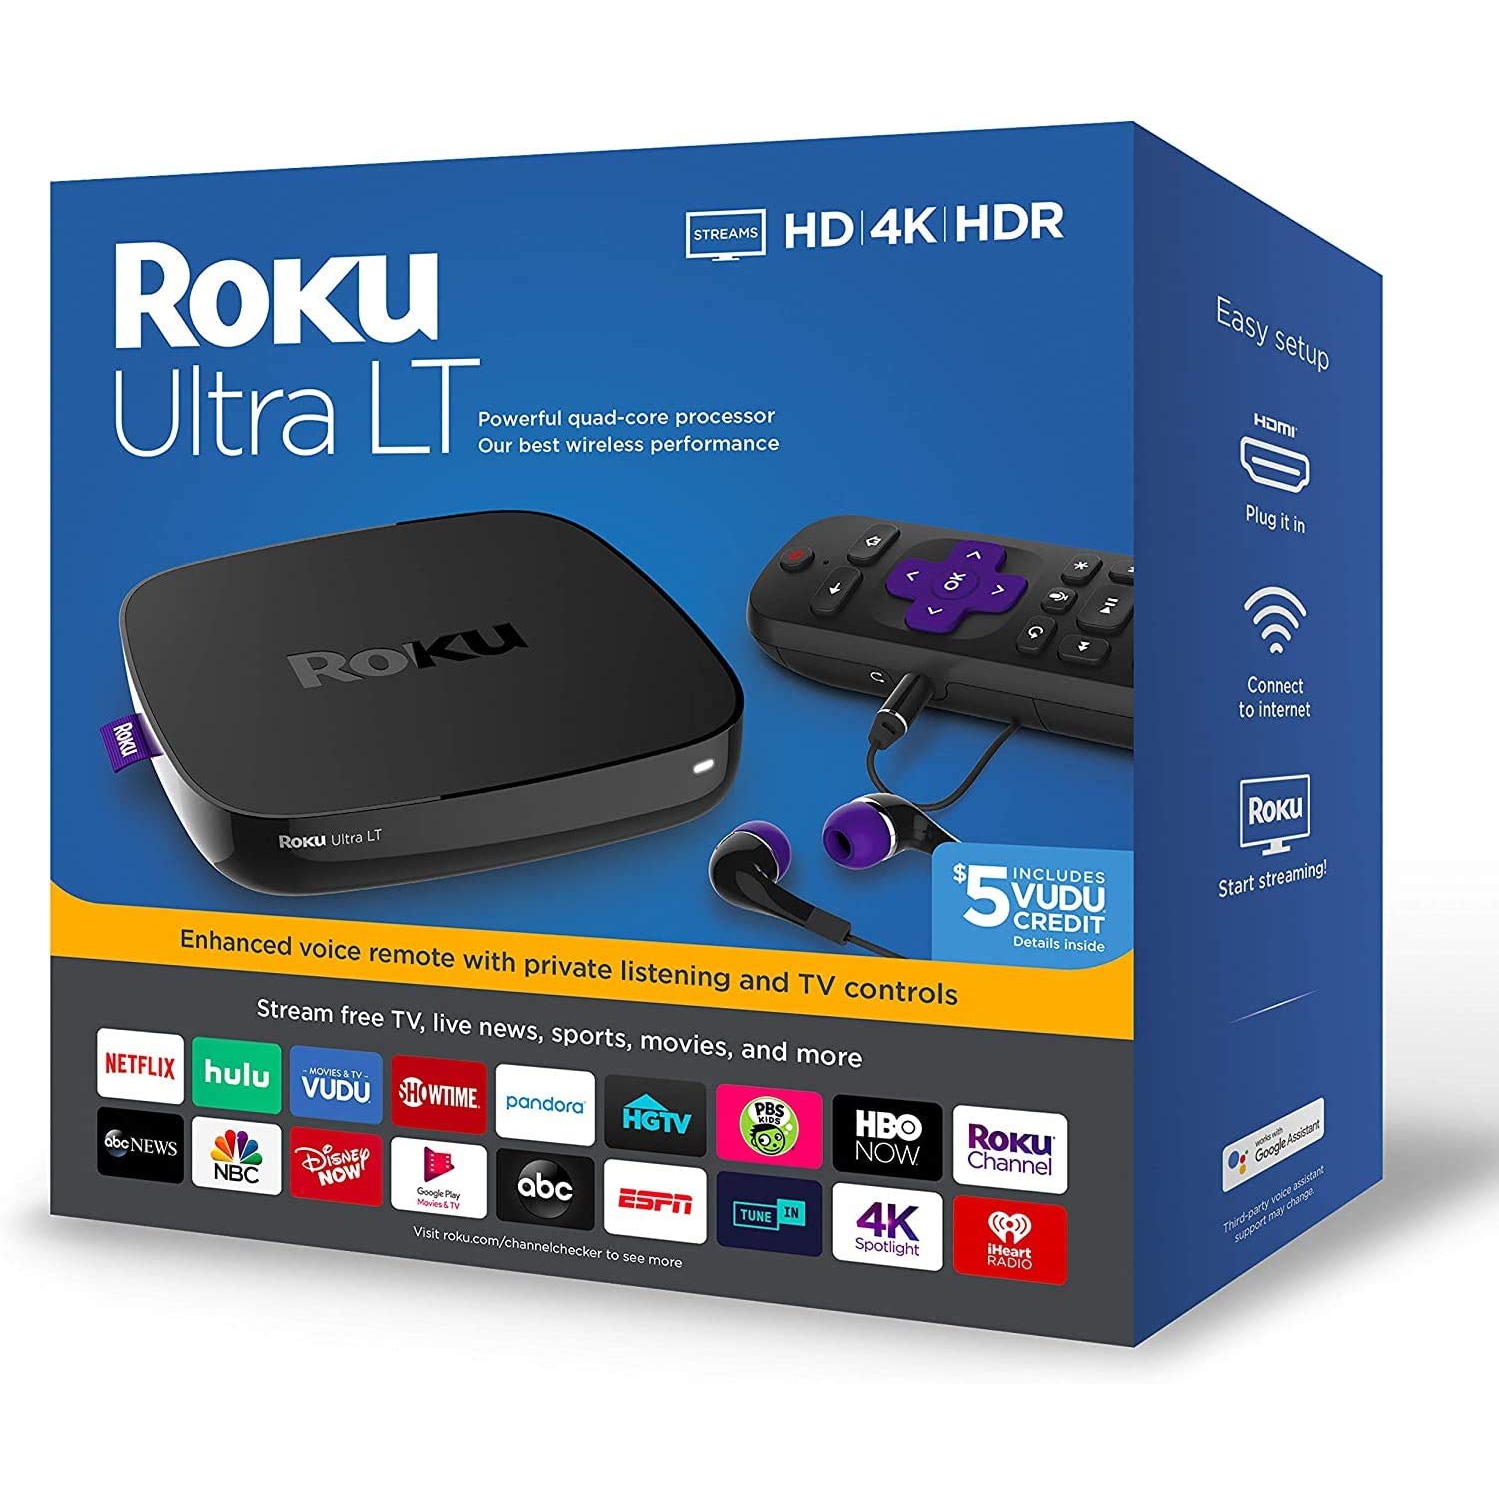 Roku Ultra LT | HD/4K/HDR Streaming Media Player with Ethernet Port and Roku Voice Remote with Headphone Jack